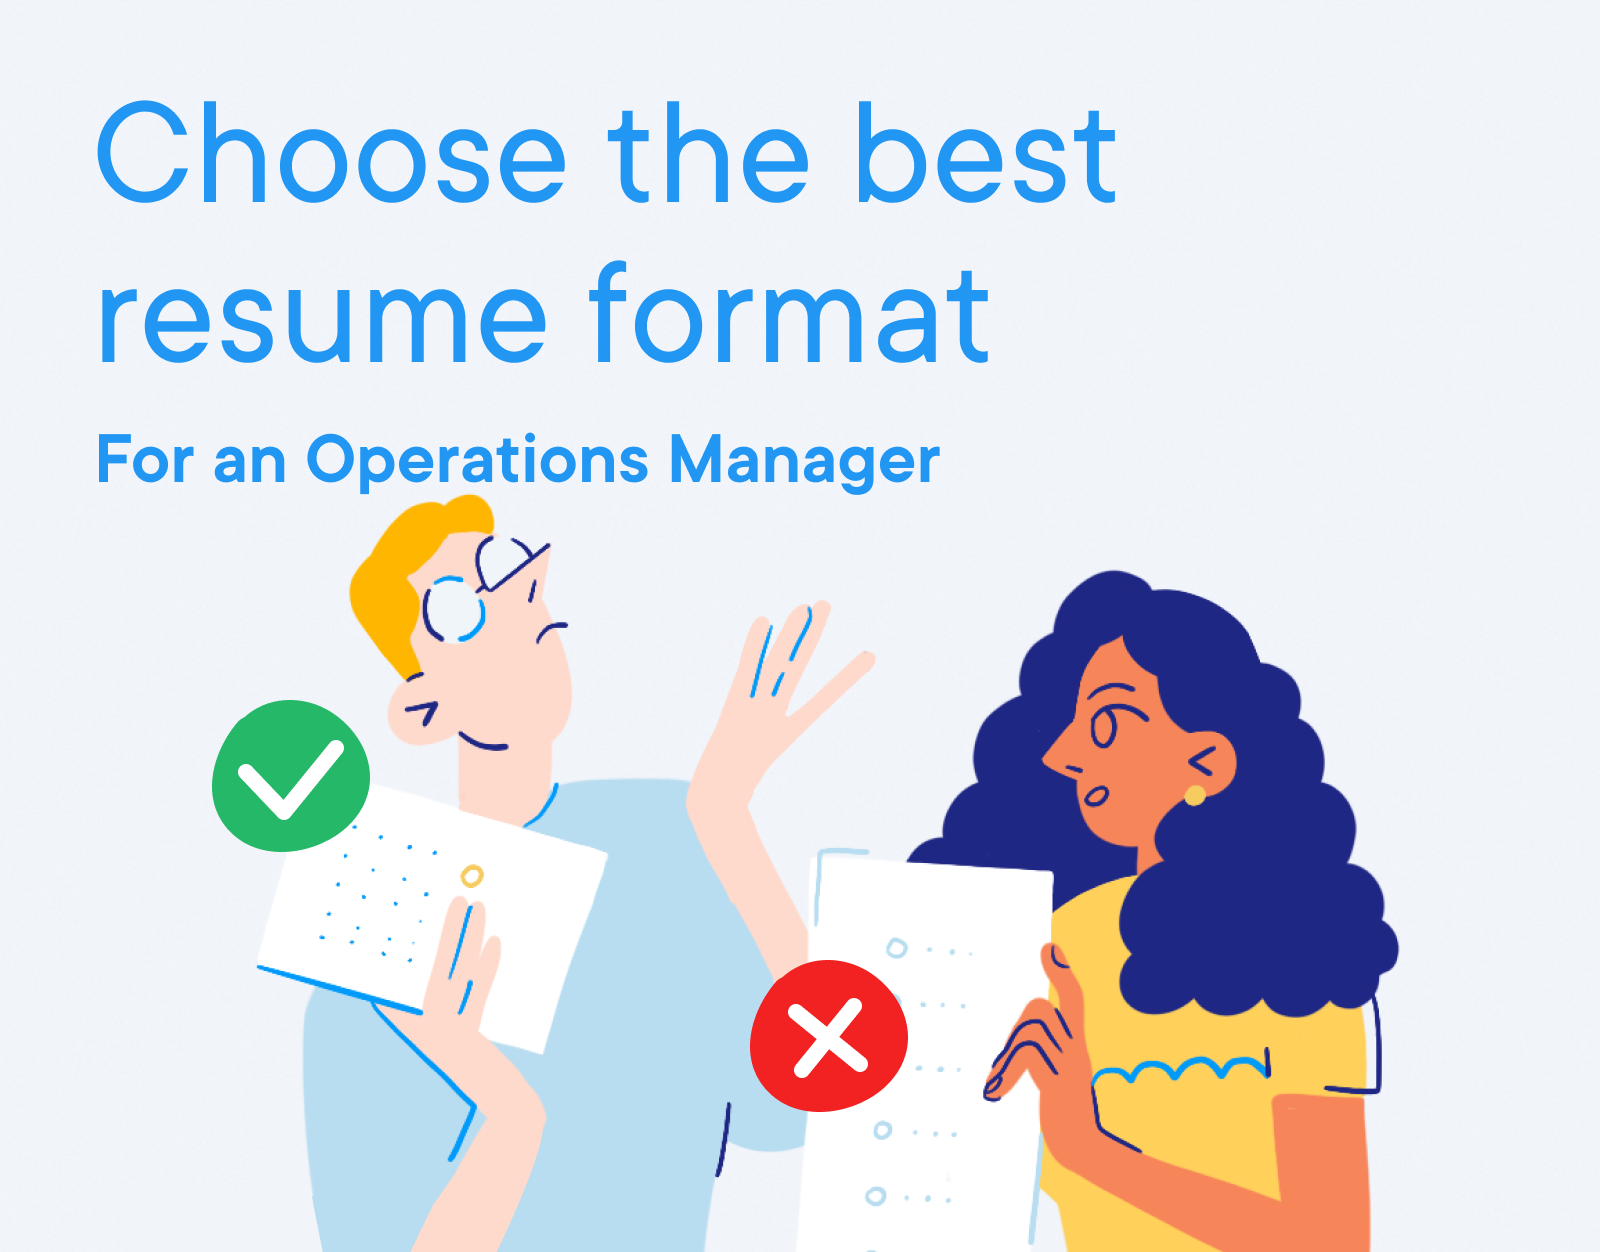 Operations Manager - Choose the best resume format